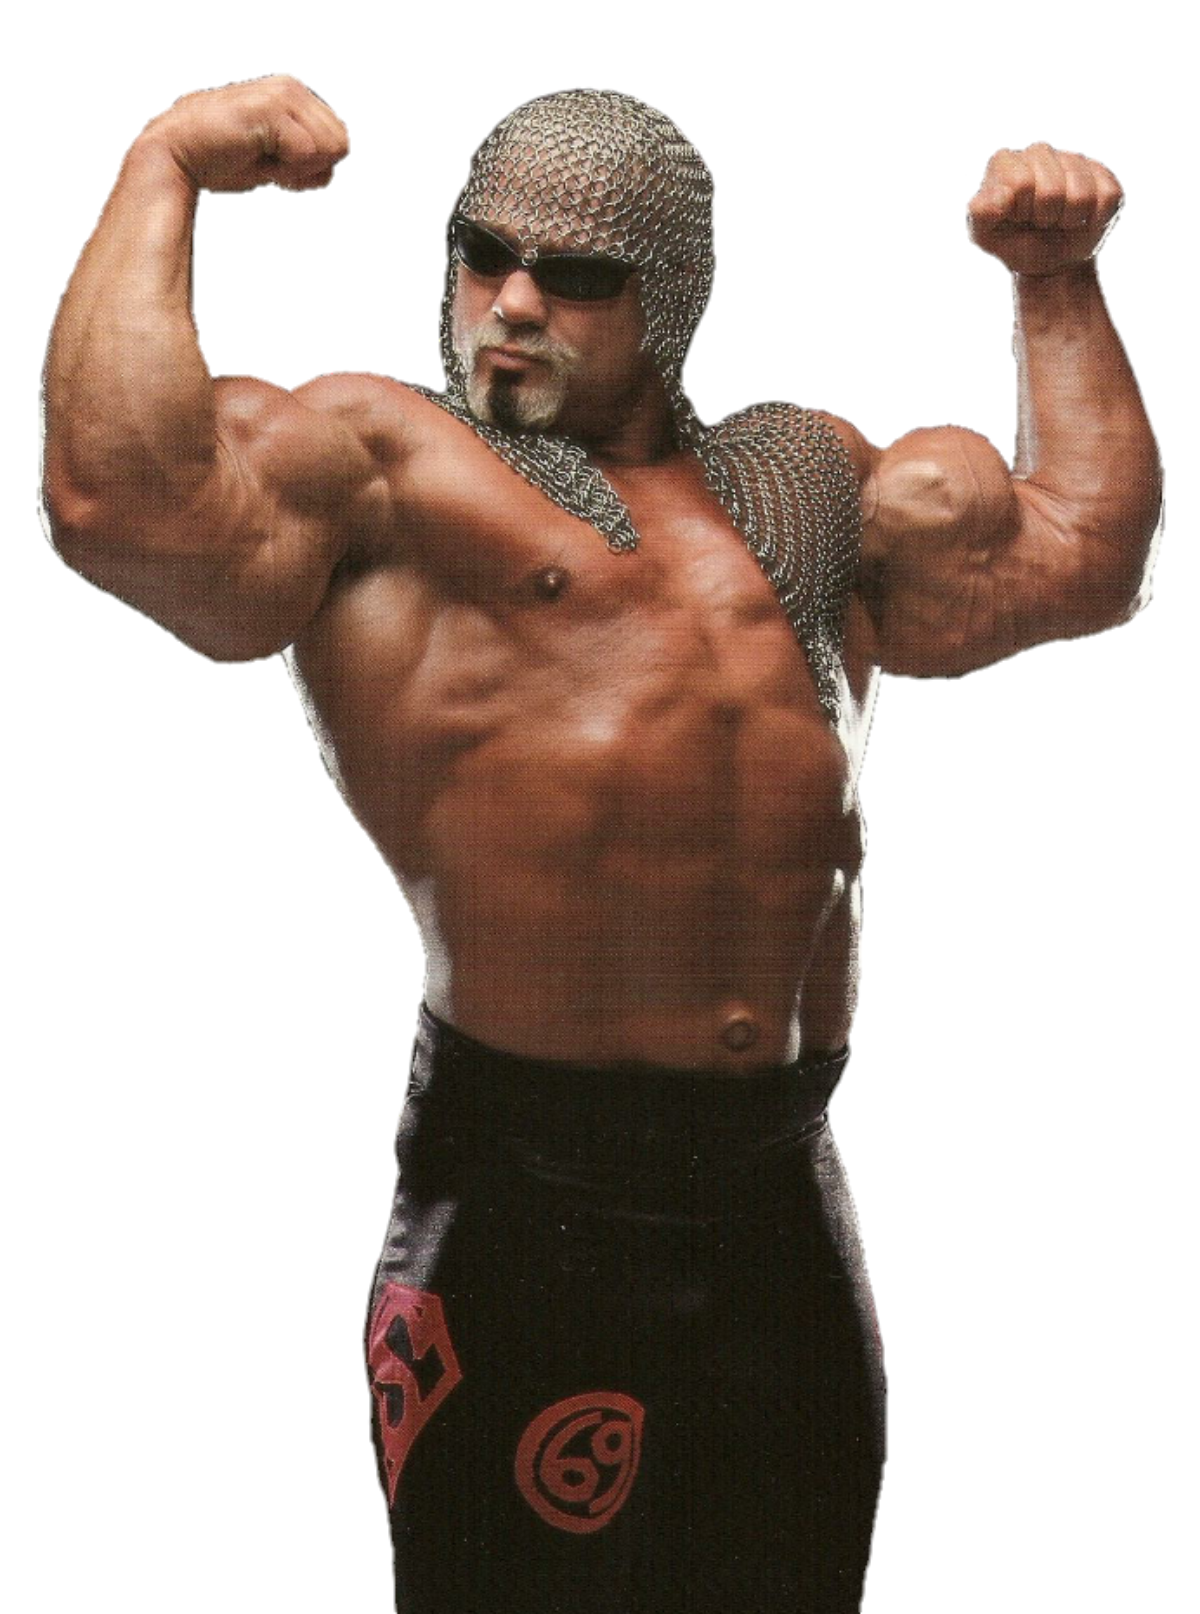 View, Download, Rate, and Comment on this Scott Steiner - WWE Image. image,...